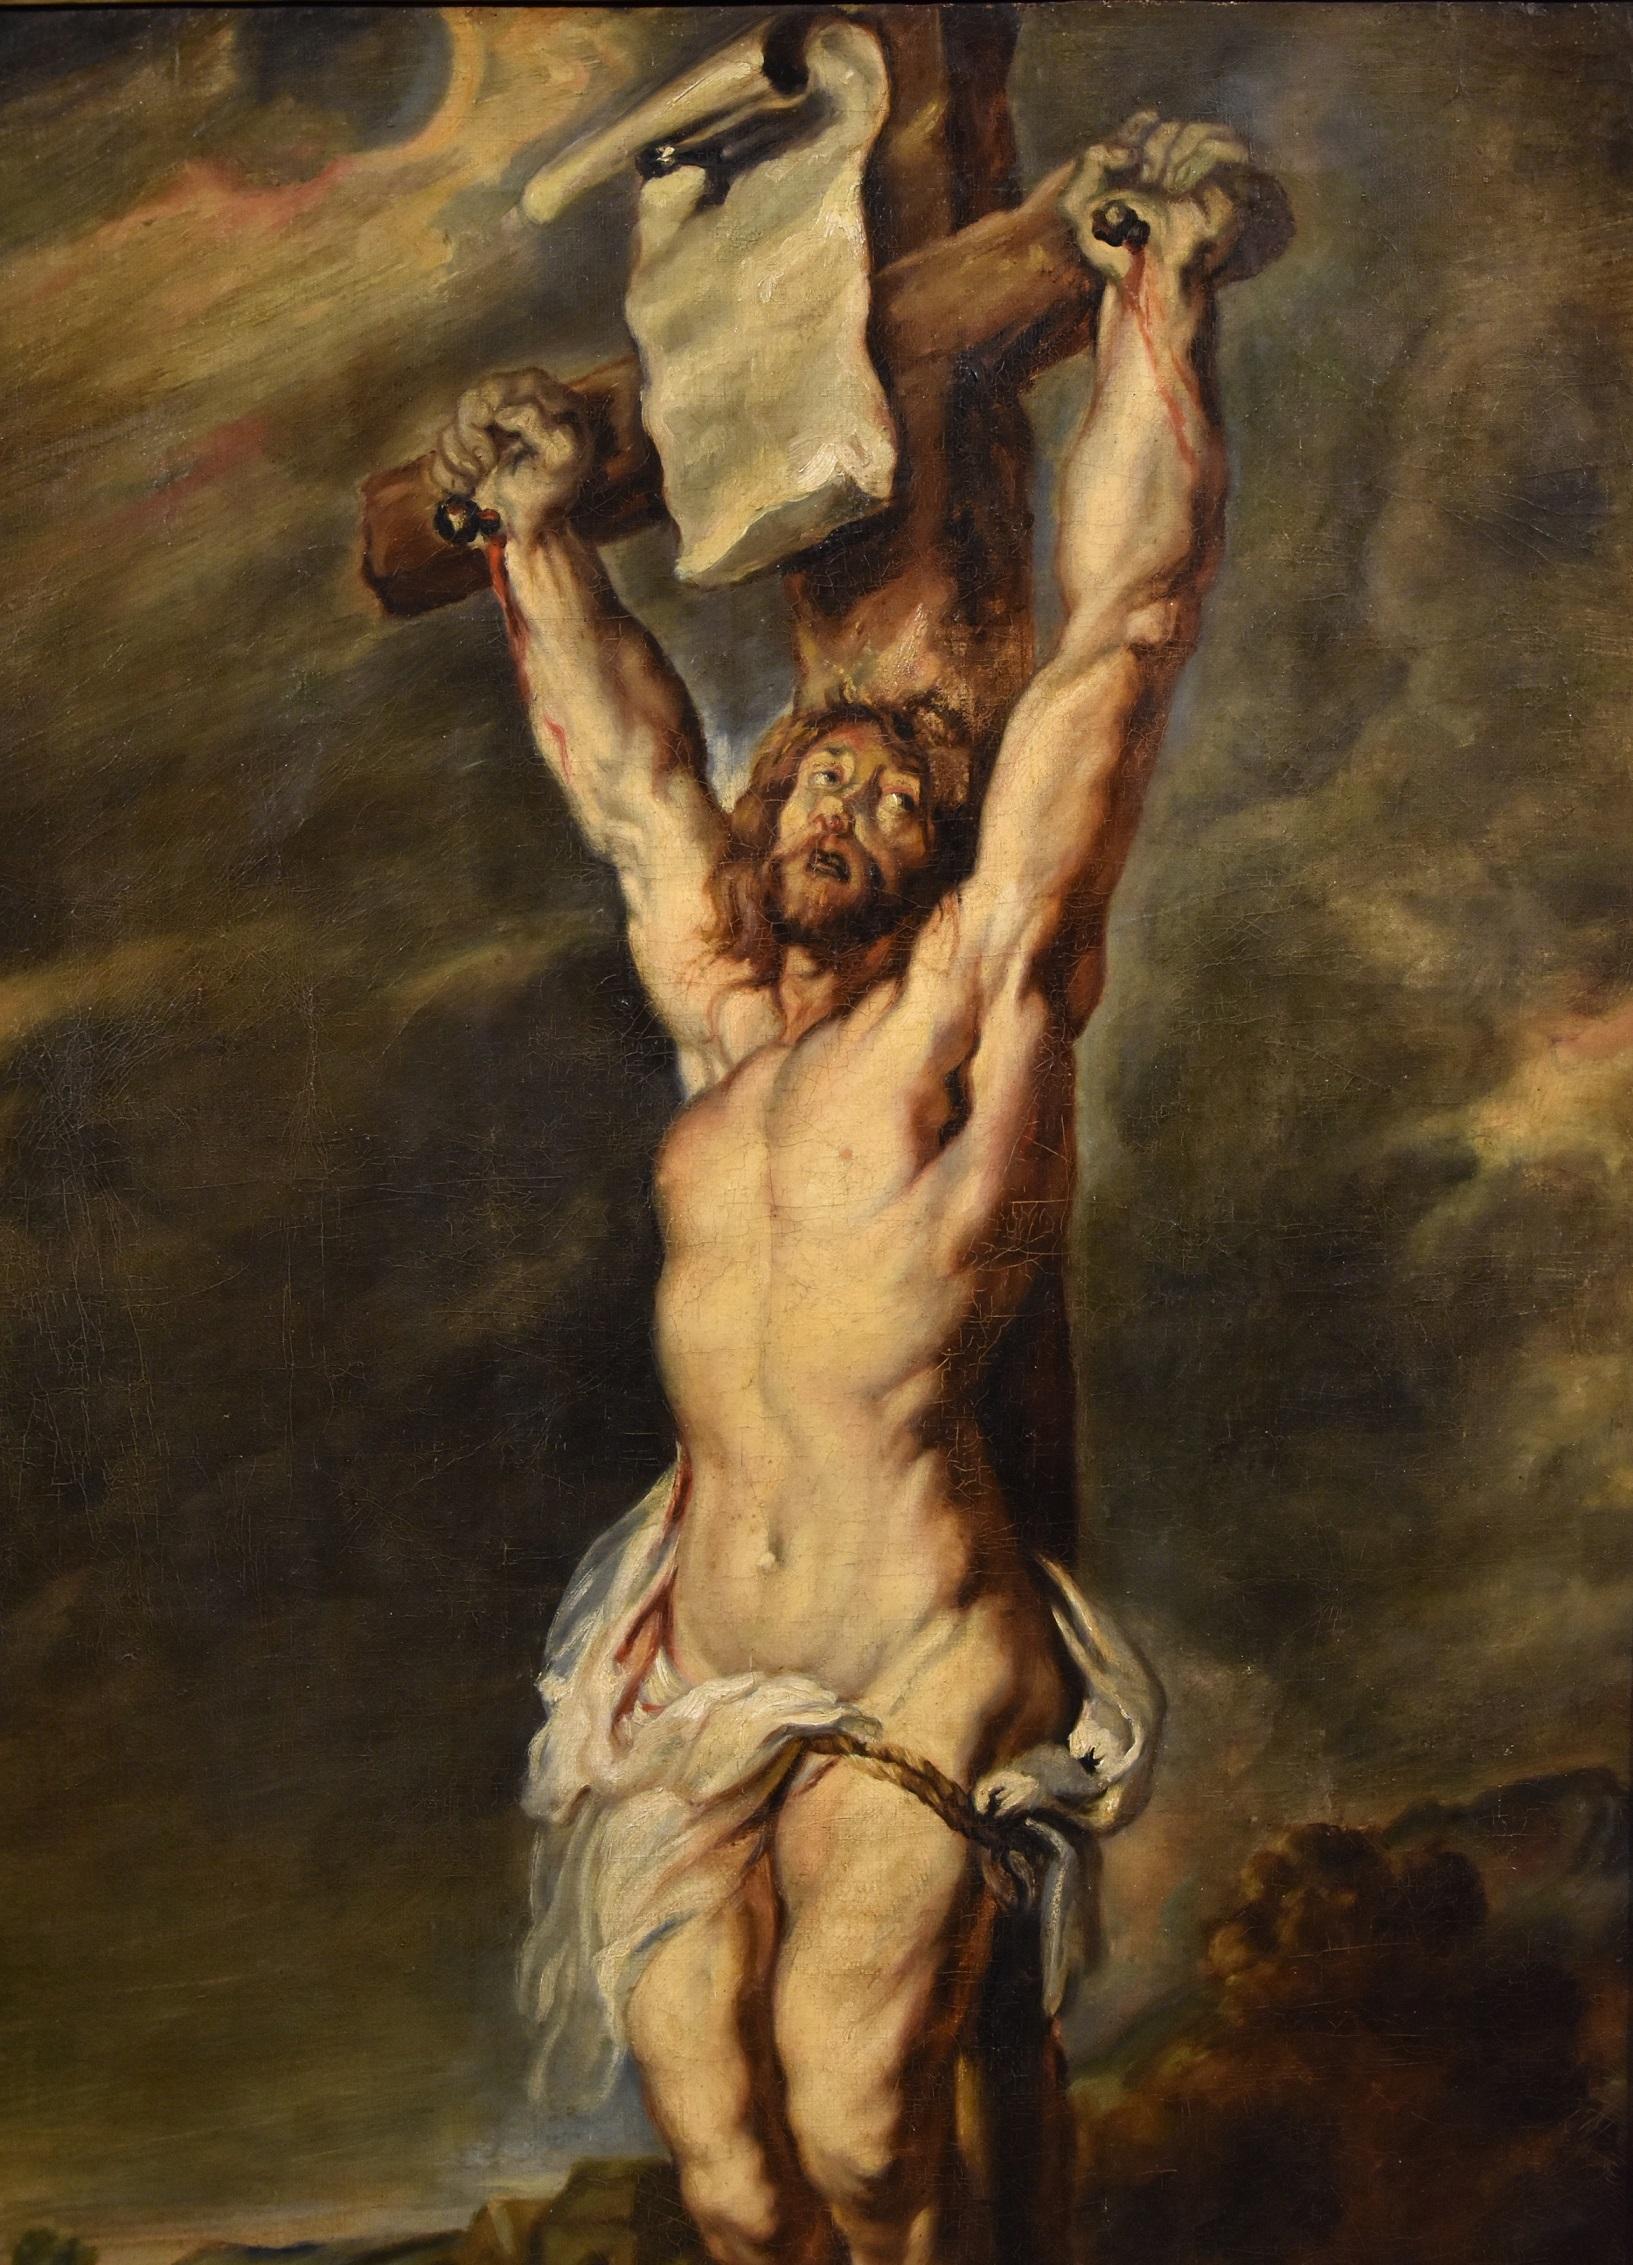 Christ Crucified Rubens Paint Oil on canvas Old master 17th Century Religious - Painting by Peter Paul Rubens (Siegen 1577 - Antwerp 1640)